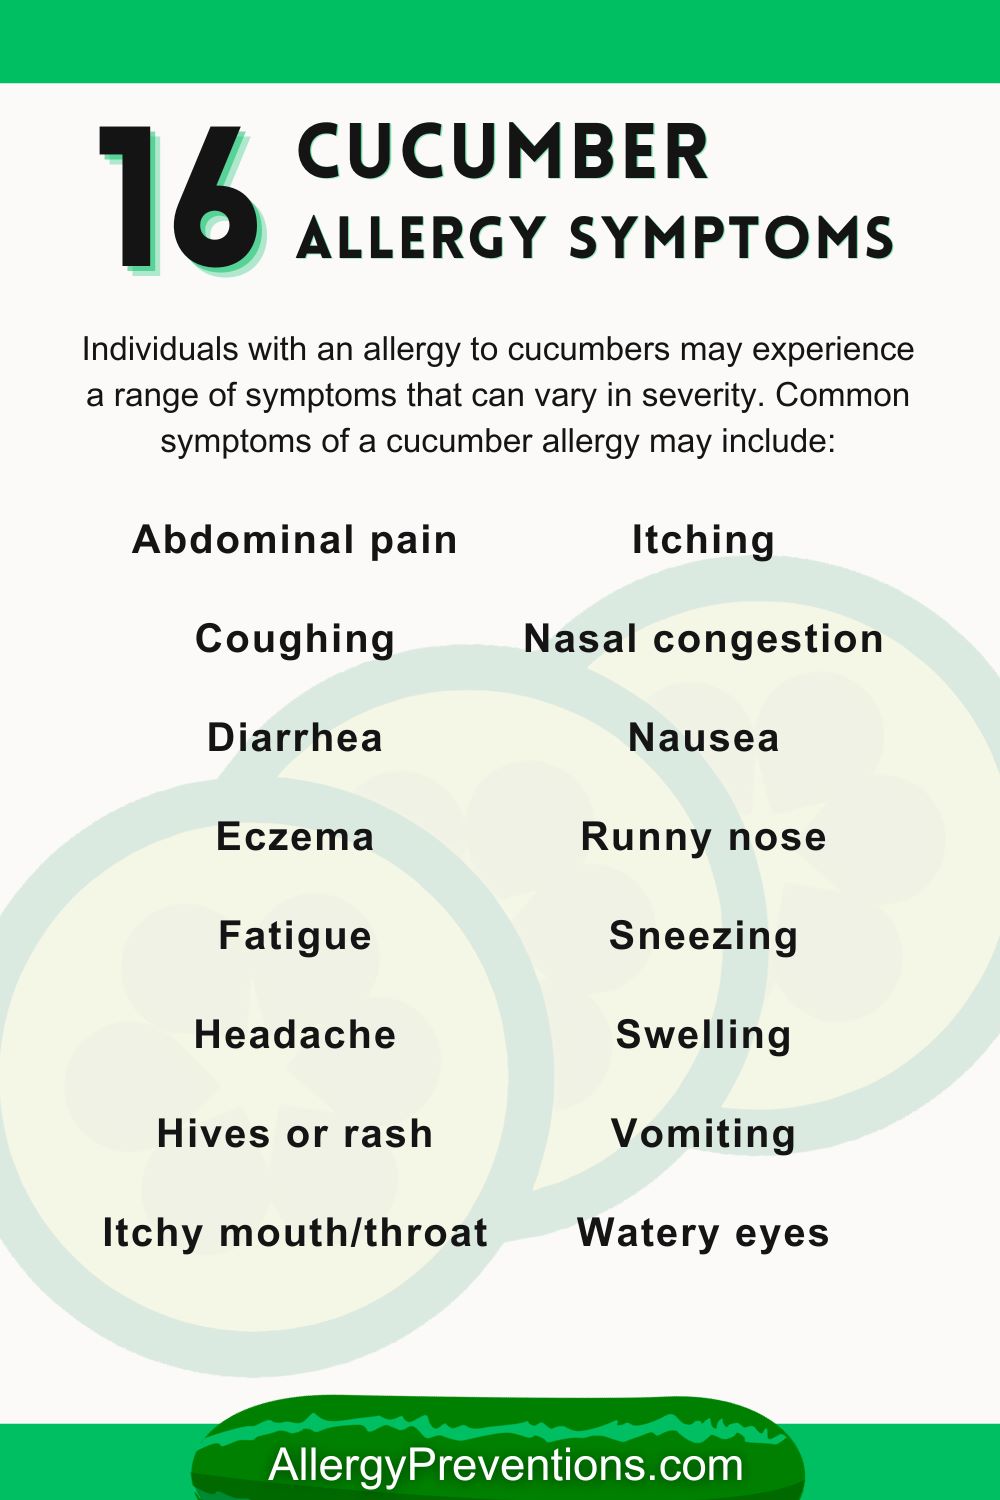 Cucumber allergy symptoms infographic. Individuals with an allergy to cucumbers may experience a range of symptoms that can vary in severity. Common symptoms of a cucumber allergy may include: Abdominal pain, Coughing, Diarrhea, Eczema, Fatigue, Headache, Hives or rash, Itchy mouth/throat, Itching, Nasal congestion, Nausea, Runny nose, Sneezing, Swelling, Vomiting, and Watery eyes.